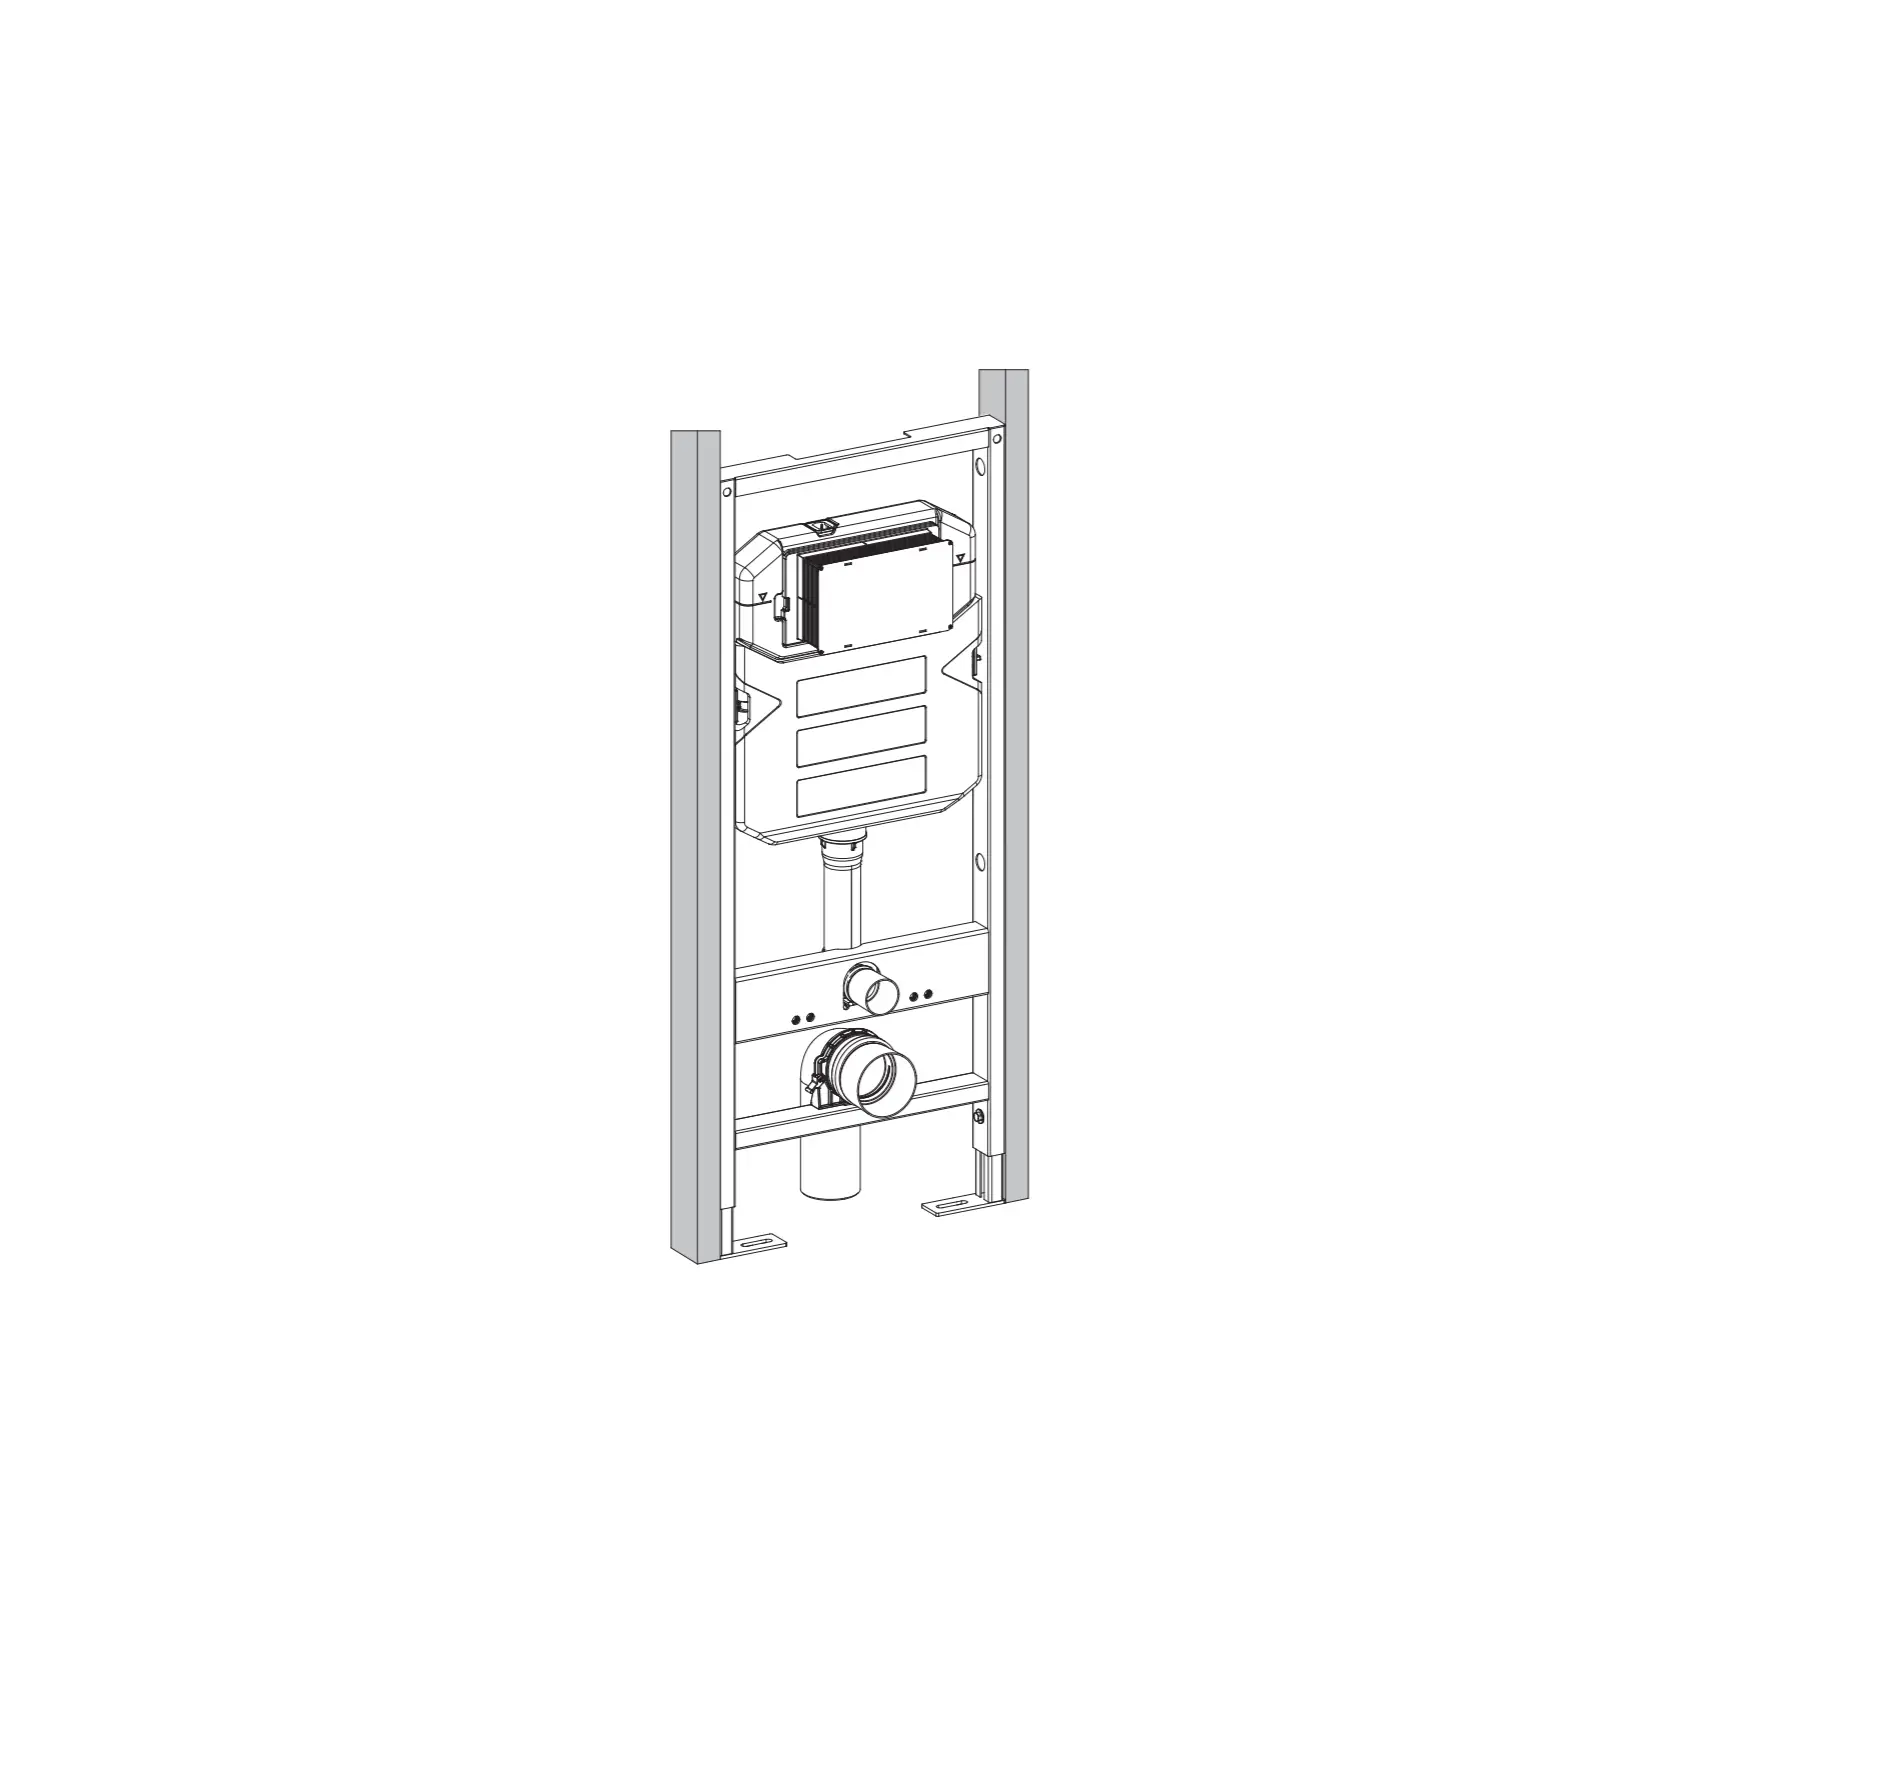 SM-WC426 Wall Hung Carrier System